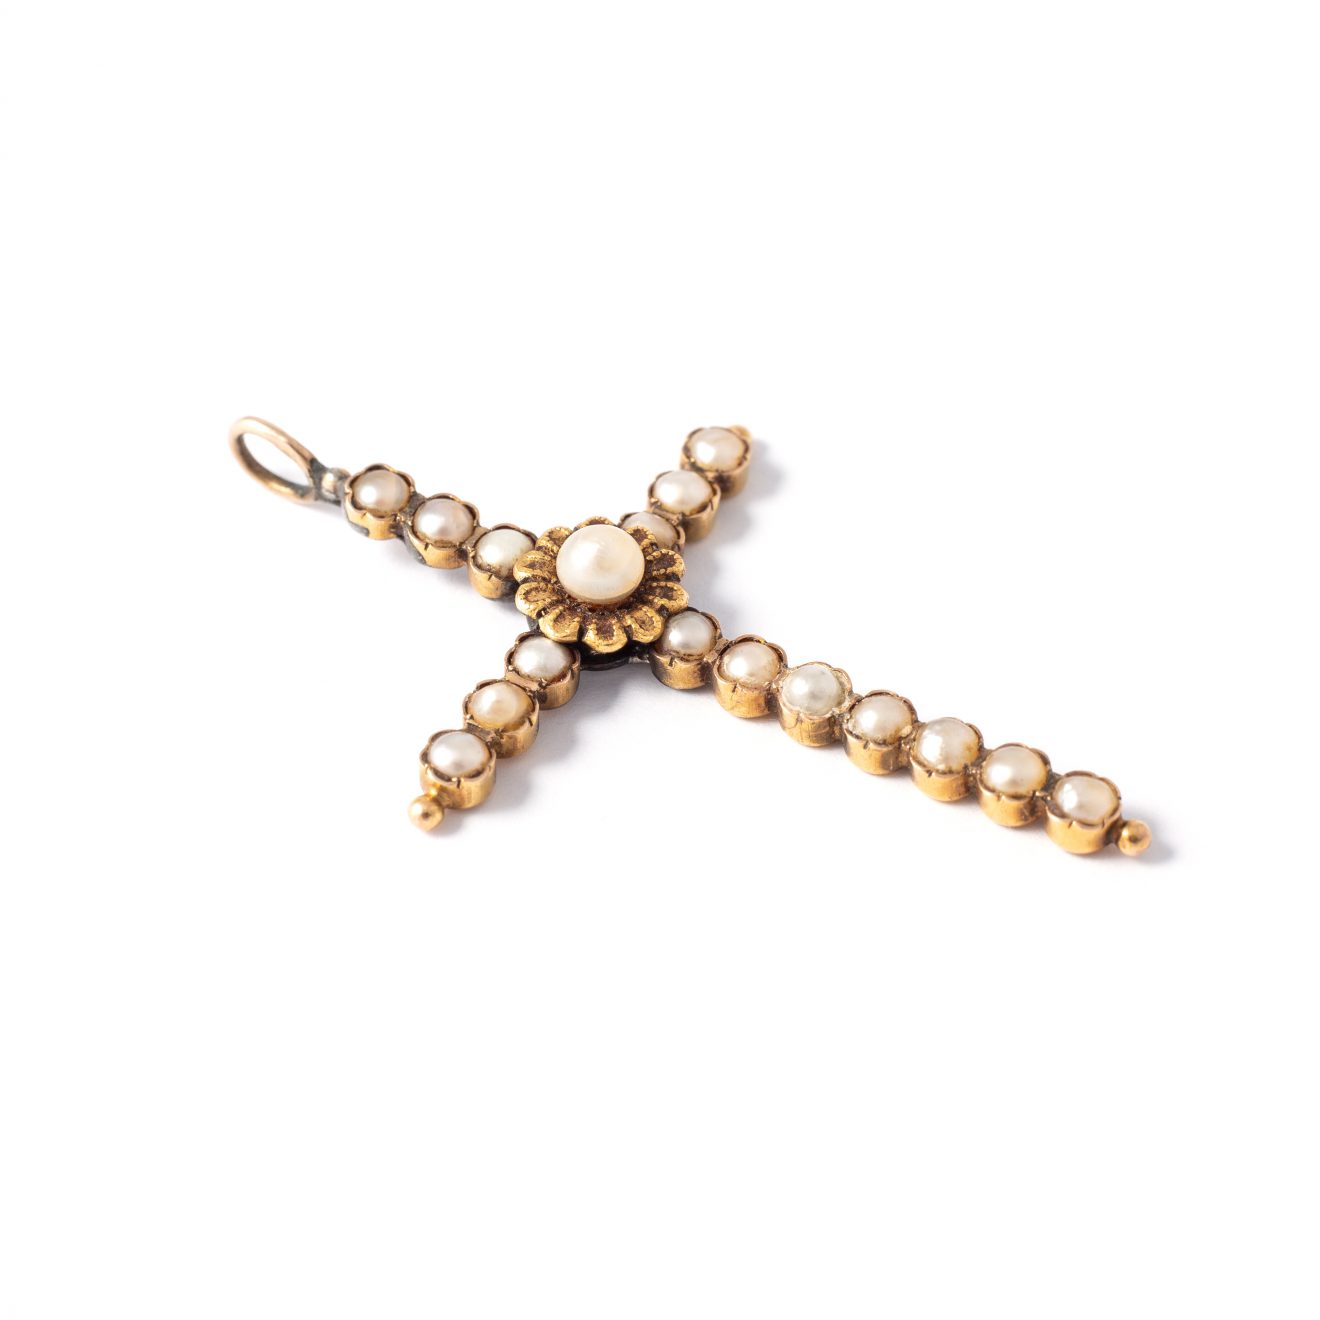 Pendant cross pearl gold white yellow necklace antique